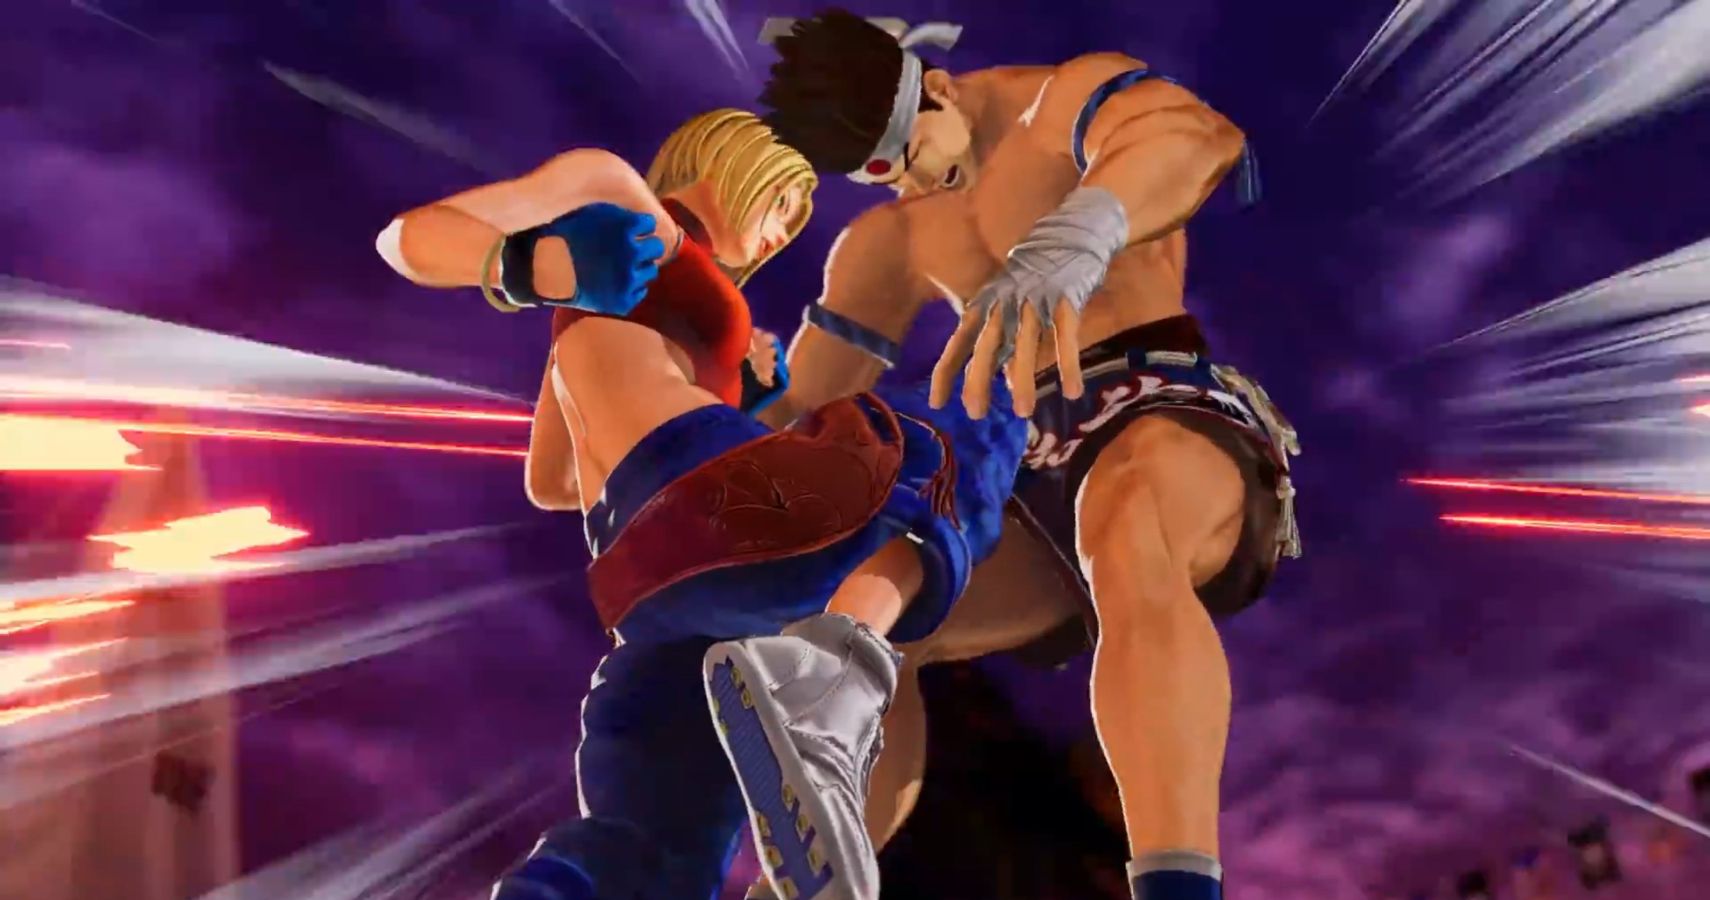 Blue Mary reveal King of Fighters 15 delayed to 2022